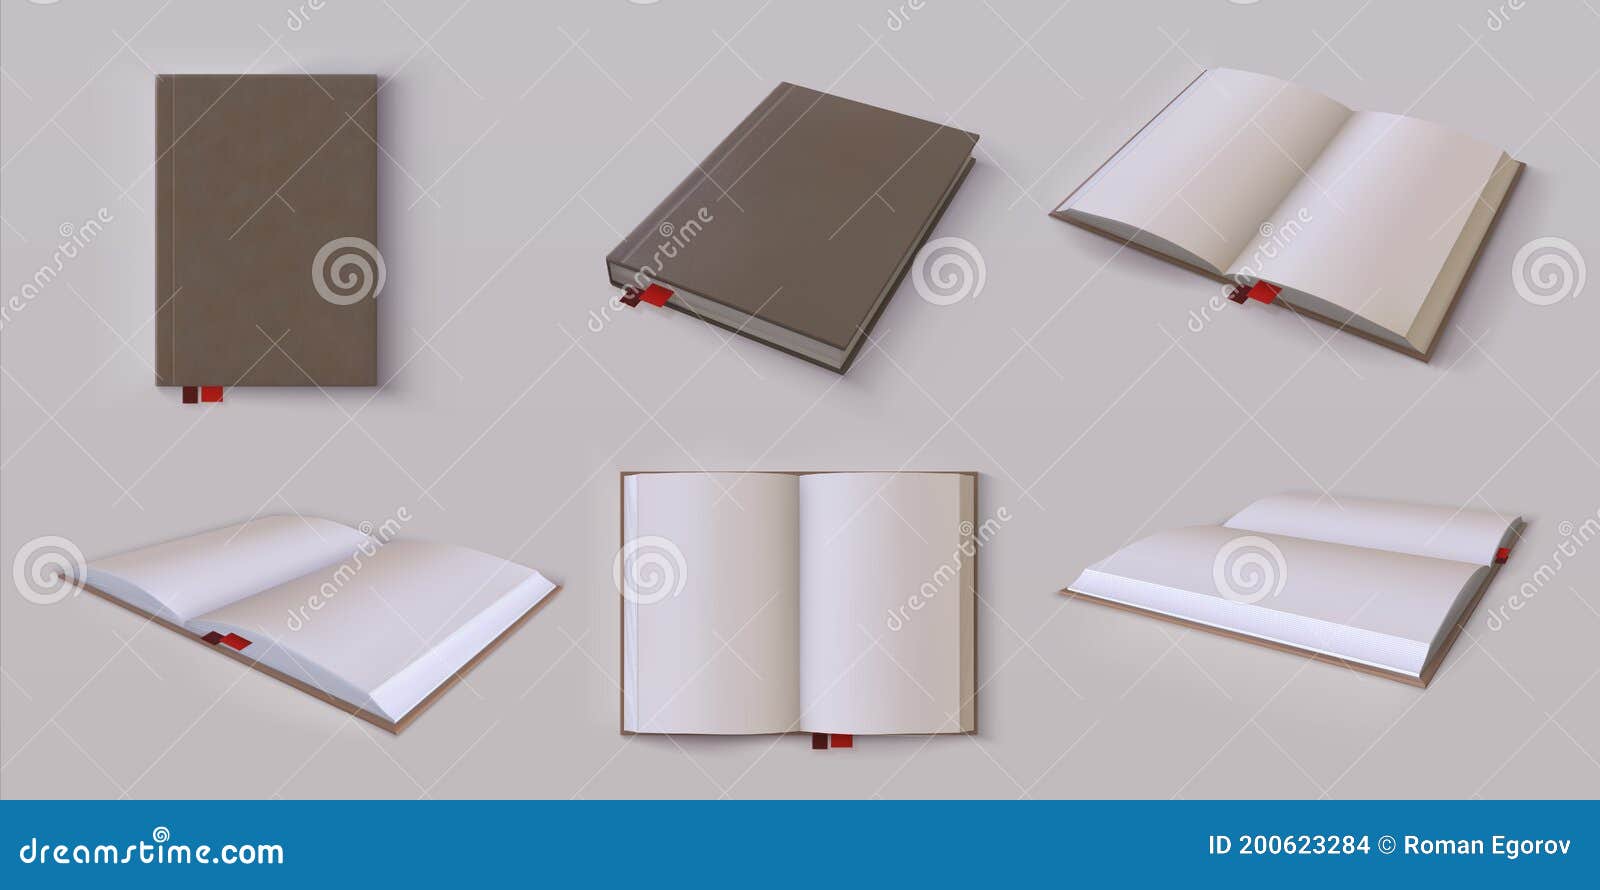 Download Diary Mockup Realistic Blank Open And Closed Planner 3d Hardcover Organizer With Bookmarks And Copy Space White Paper Stock Vector Illustration Of Hardcover Isolated 200623284